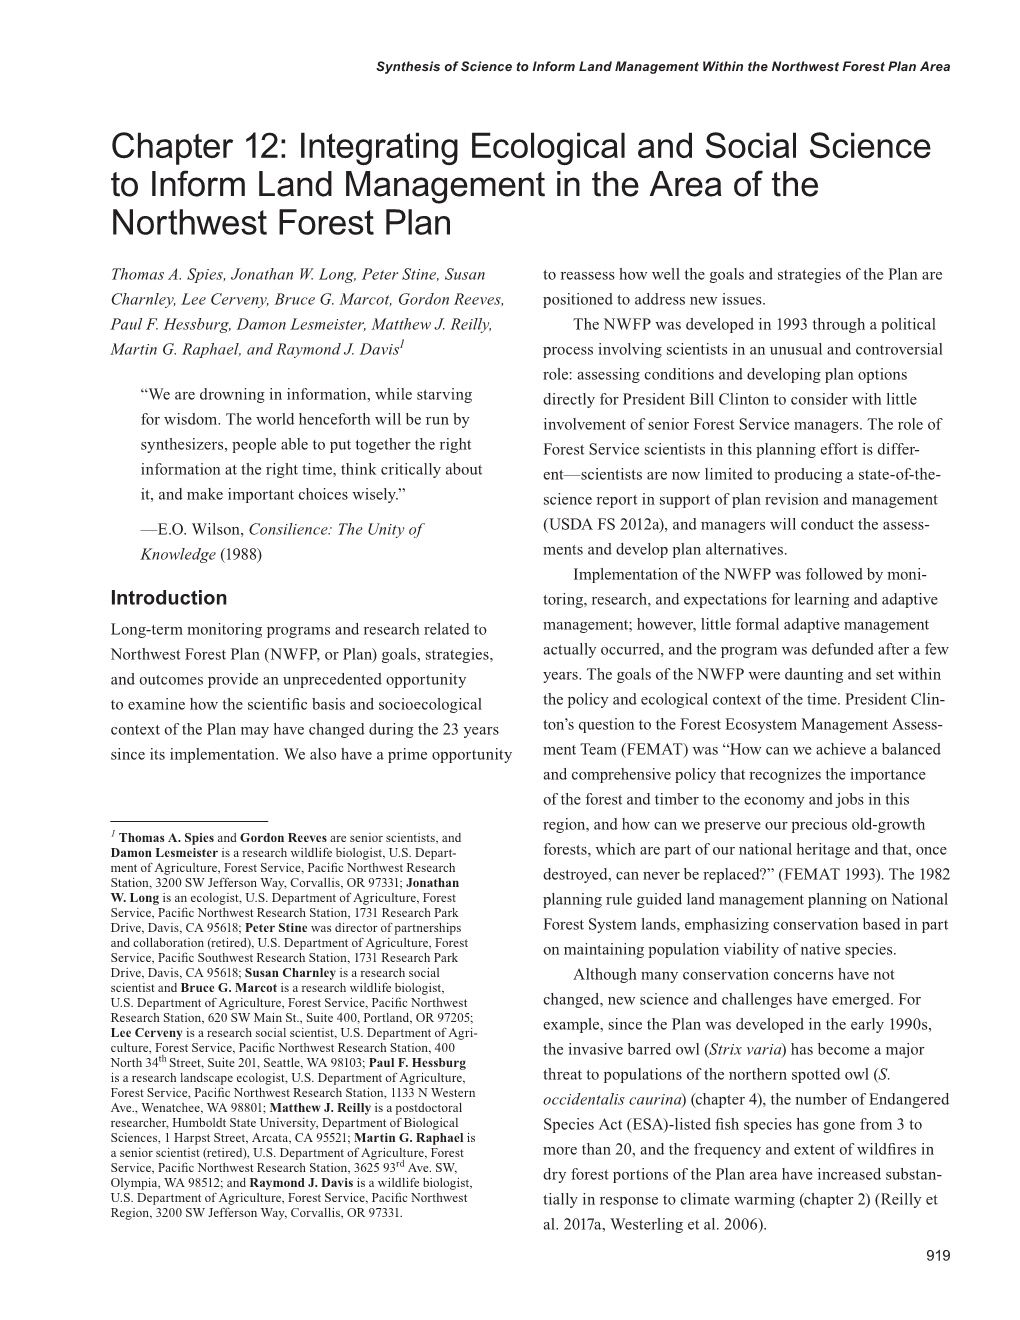 Chapter 12: Integrating Ecological and Social Science to Inform Land Management in the Area of the Northwest Forest Plan